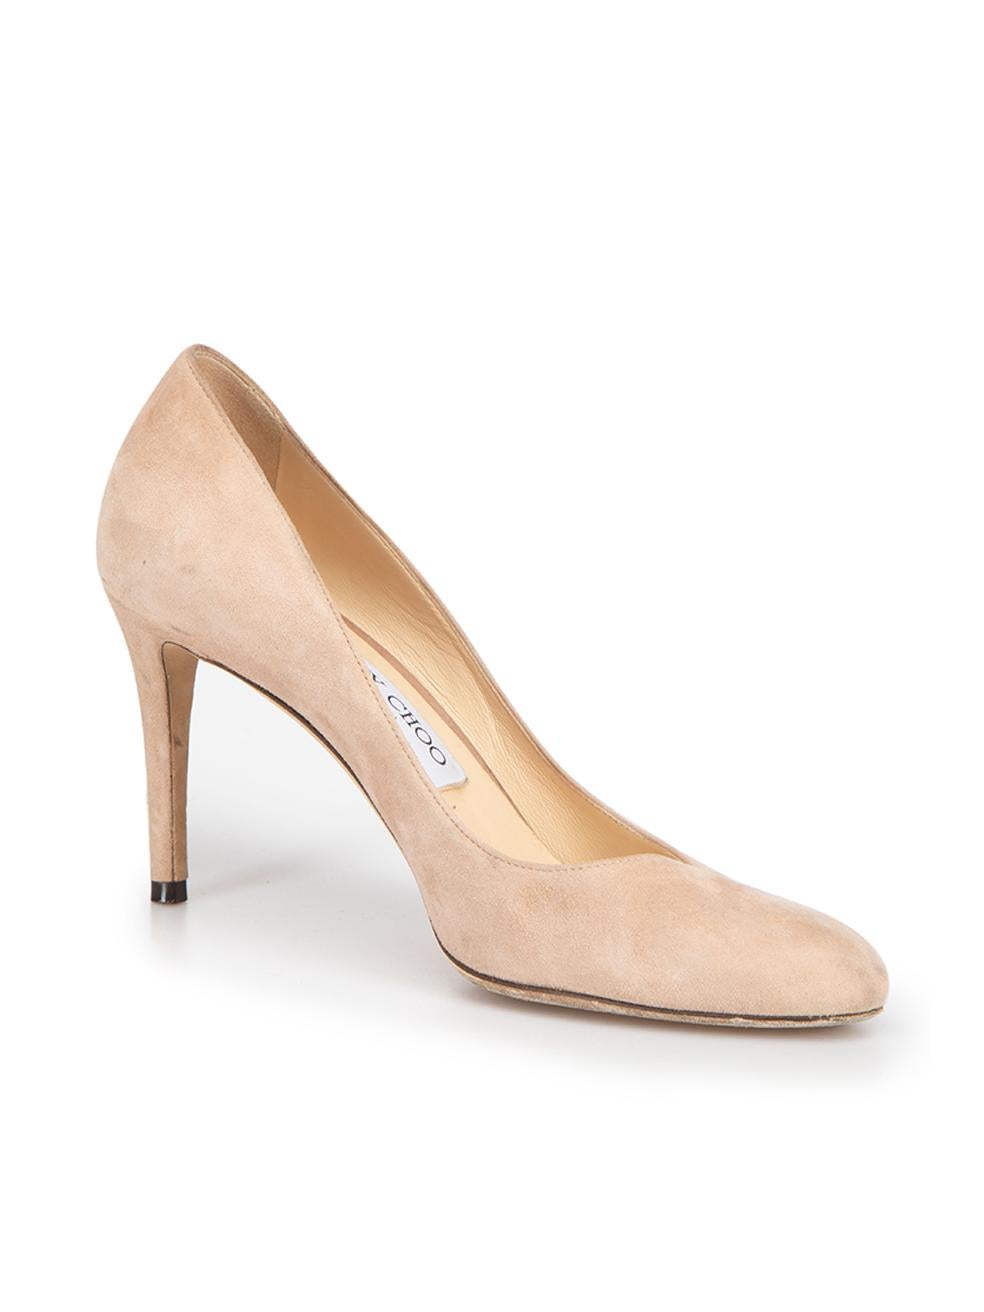 CONDITION is Very good. Minimal wear to heels is evident. Minimal wear and scuffs to the suede exterior and marks can be seen around the heel stem on this used Jimmy Choo designer resale item. 



Details


Beige

Suede

Slip on pumps

Round